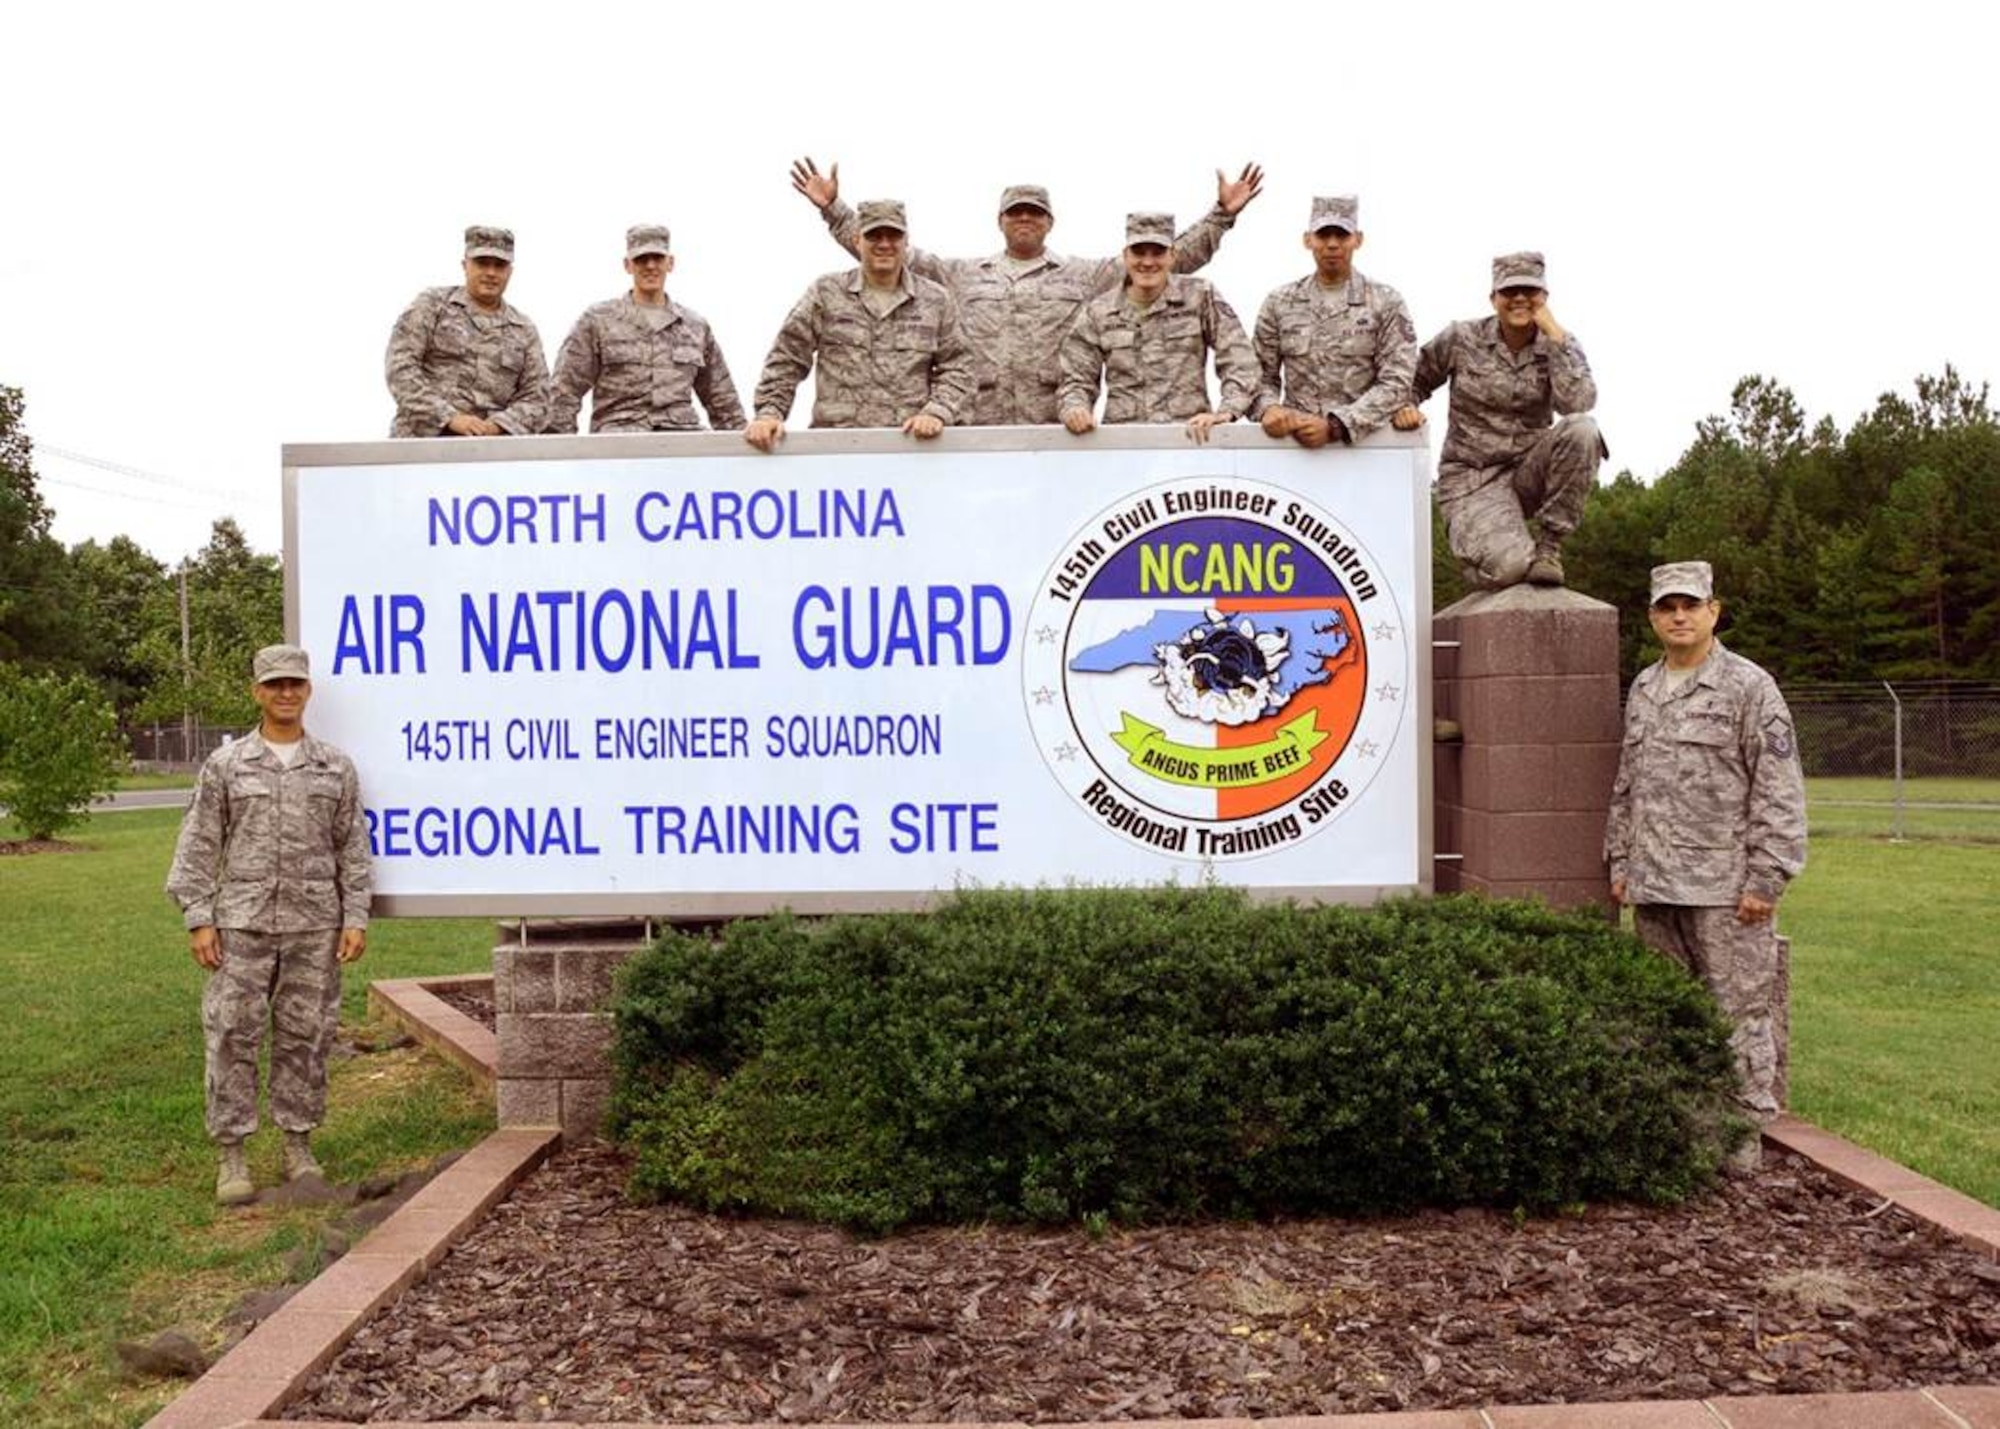 The 145th Regional Training Site in New London, N.C. was host to nine Airmen attending the Instructor Certification Program (ICP). This two week certification course prepared Airmen to be military instructors both at home station and at satellite locations. Members of the 145th Civil Engineer Squadron along with 163d Reconnaissance Wing,at March Joint Air Reserve Base, California Air National Guard’s 144th Fighter Wing, and Airmen from Wisconsin Air National Guard’s 128th Air Refueling Wing all graduated Sept 4, 2015. The course was taught by Master Sgt. Clifton Boswell from the I. G. Brown Training Center, McGhee-Tyson ANG Base in Knoxville, Tennessee.  (U.S. Air National Guard photo by Master Sgt. Patricia F. Moran, 145th Public Affairs/Released)